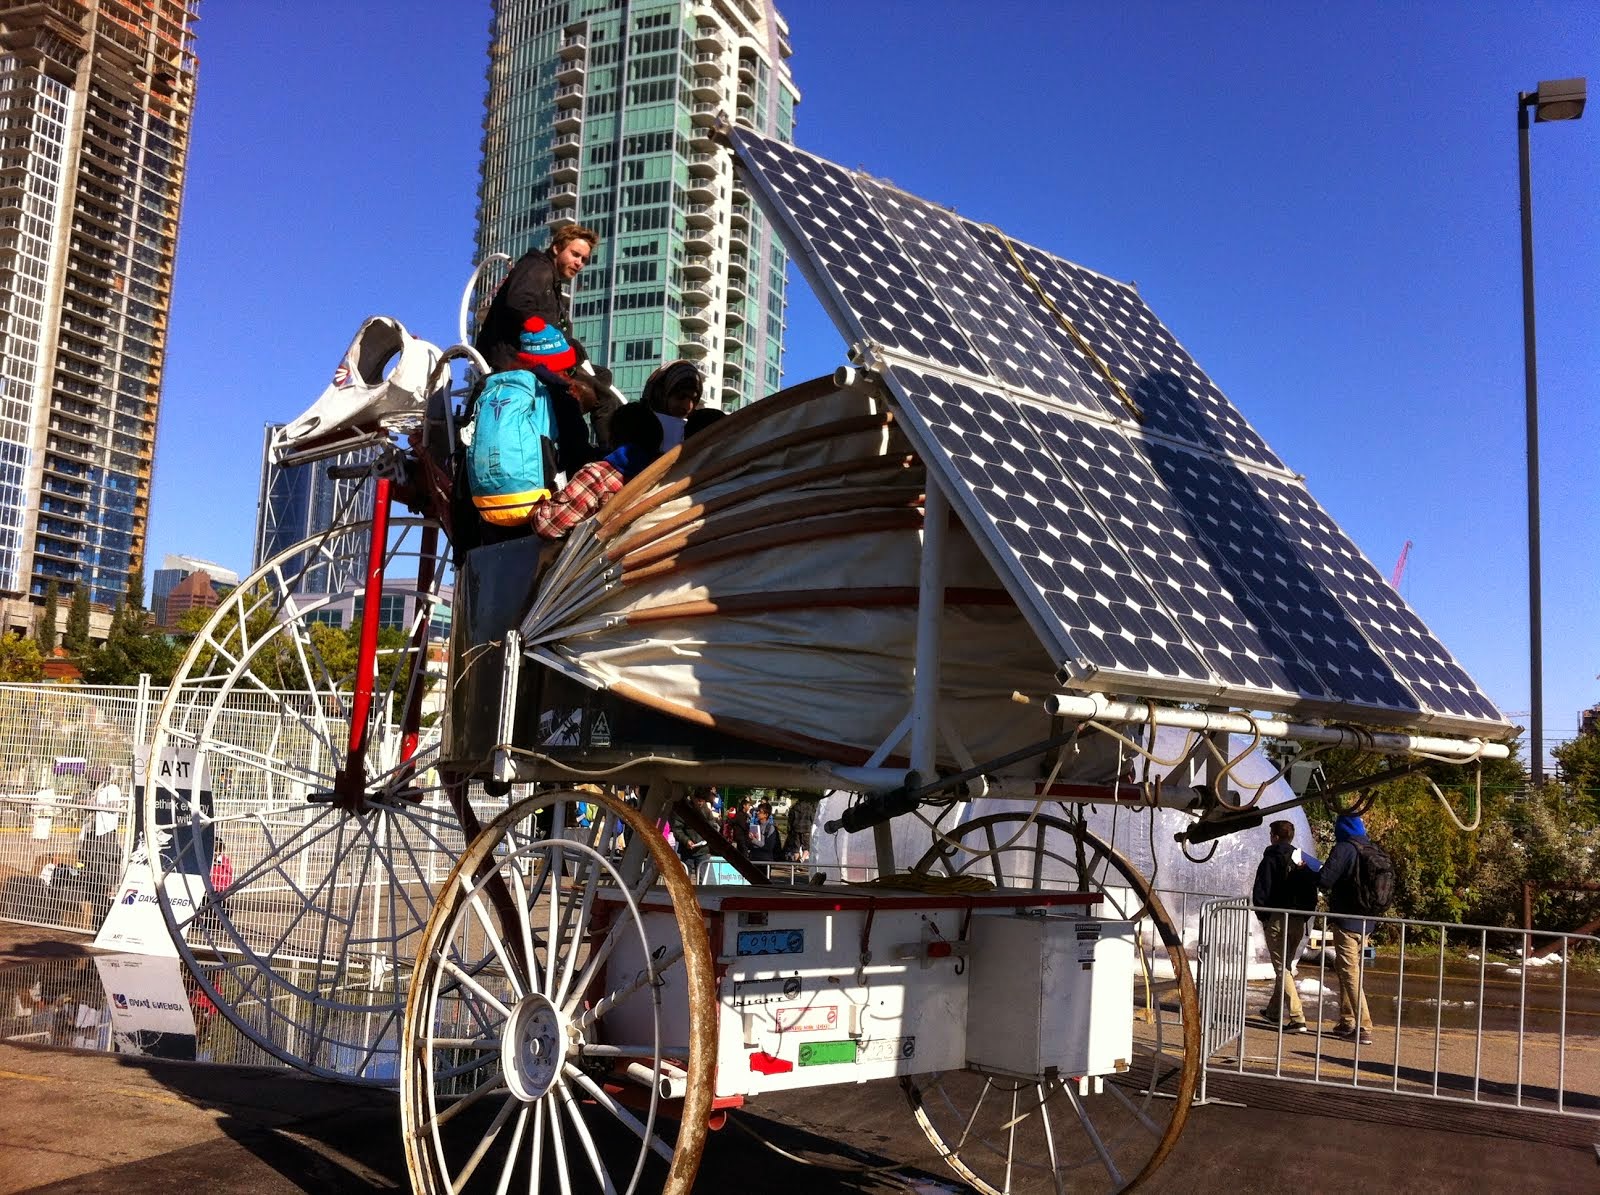 eatART's Daisy the Solar Paneled Tricycle Carriage